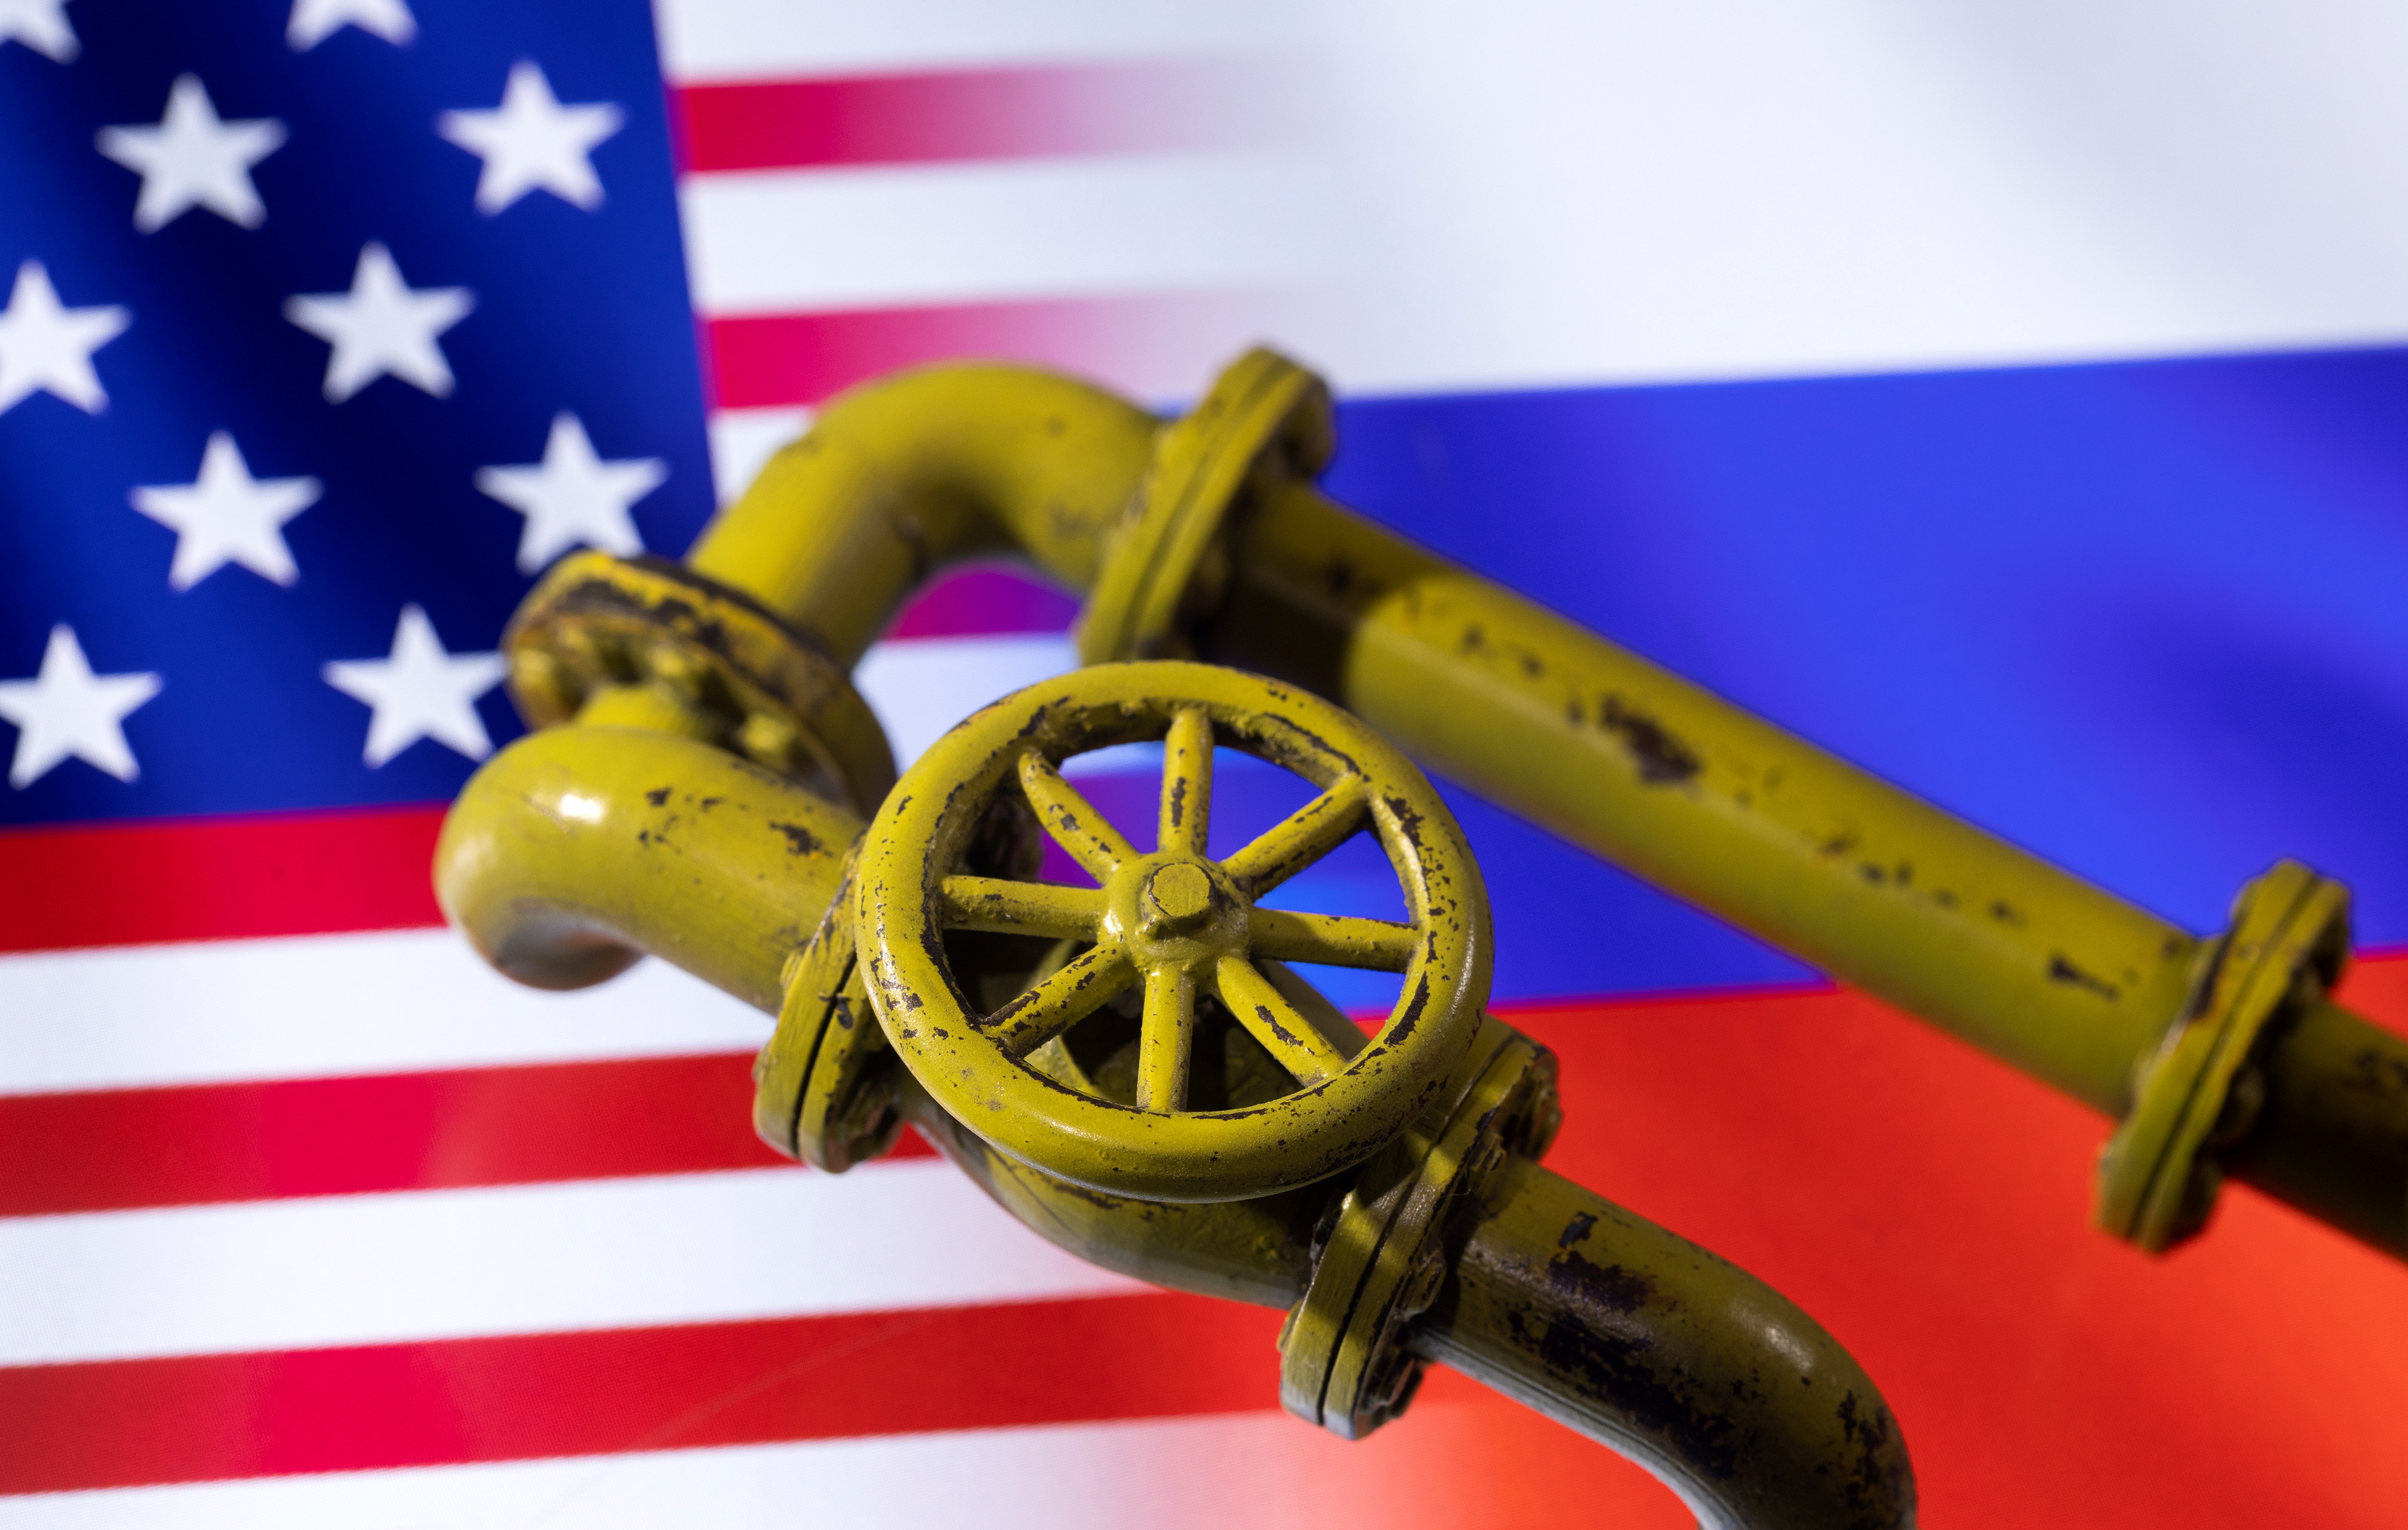 Illustration shows Natural Gas Pipes and U.S. and Russian flags